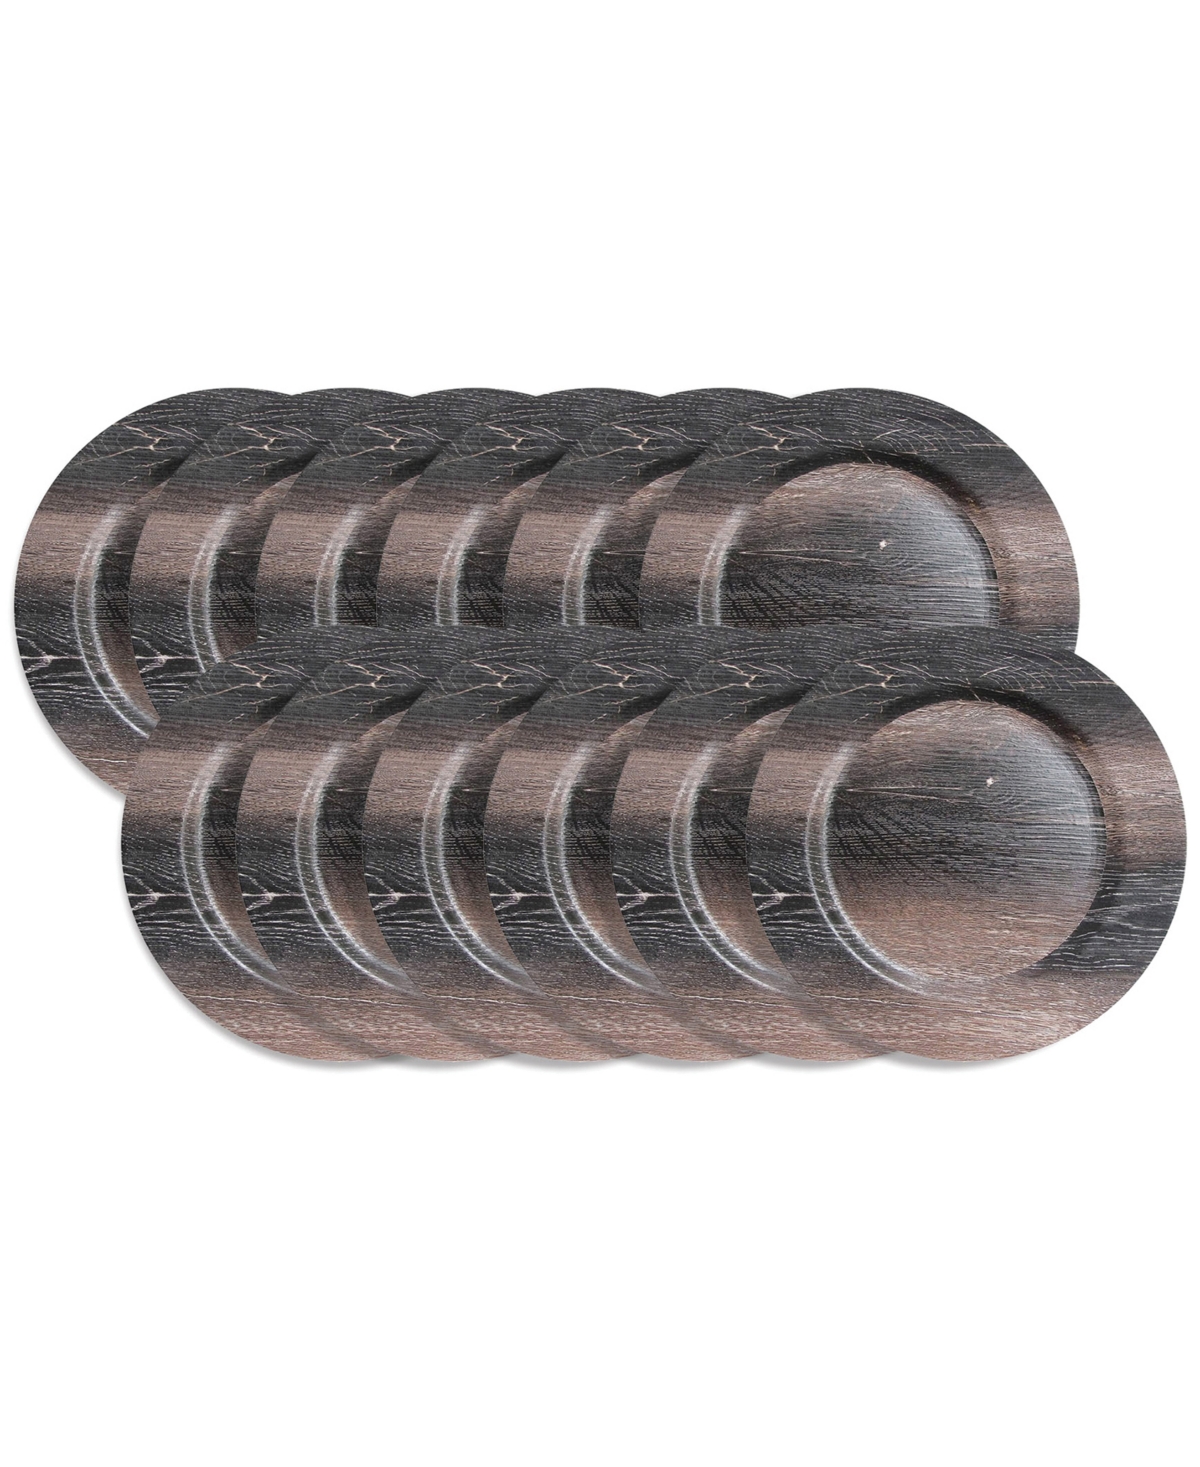 American Atelier Walnut Finish Charger Plate 12 Piece Dinnerware Set, Service For 12 In Brown